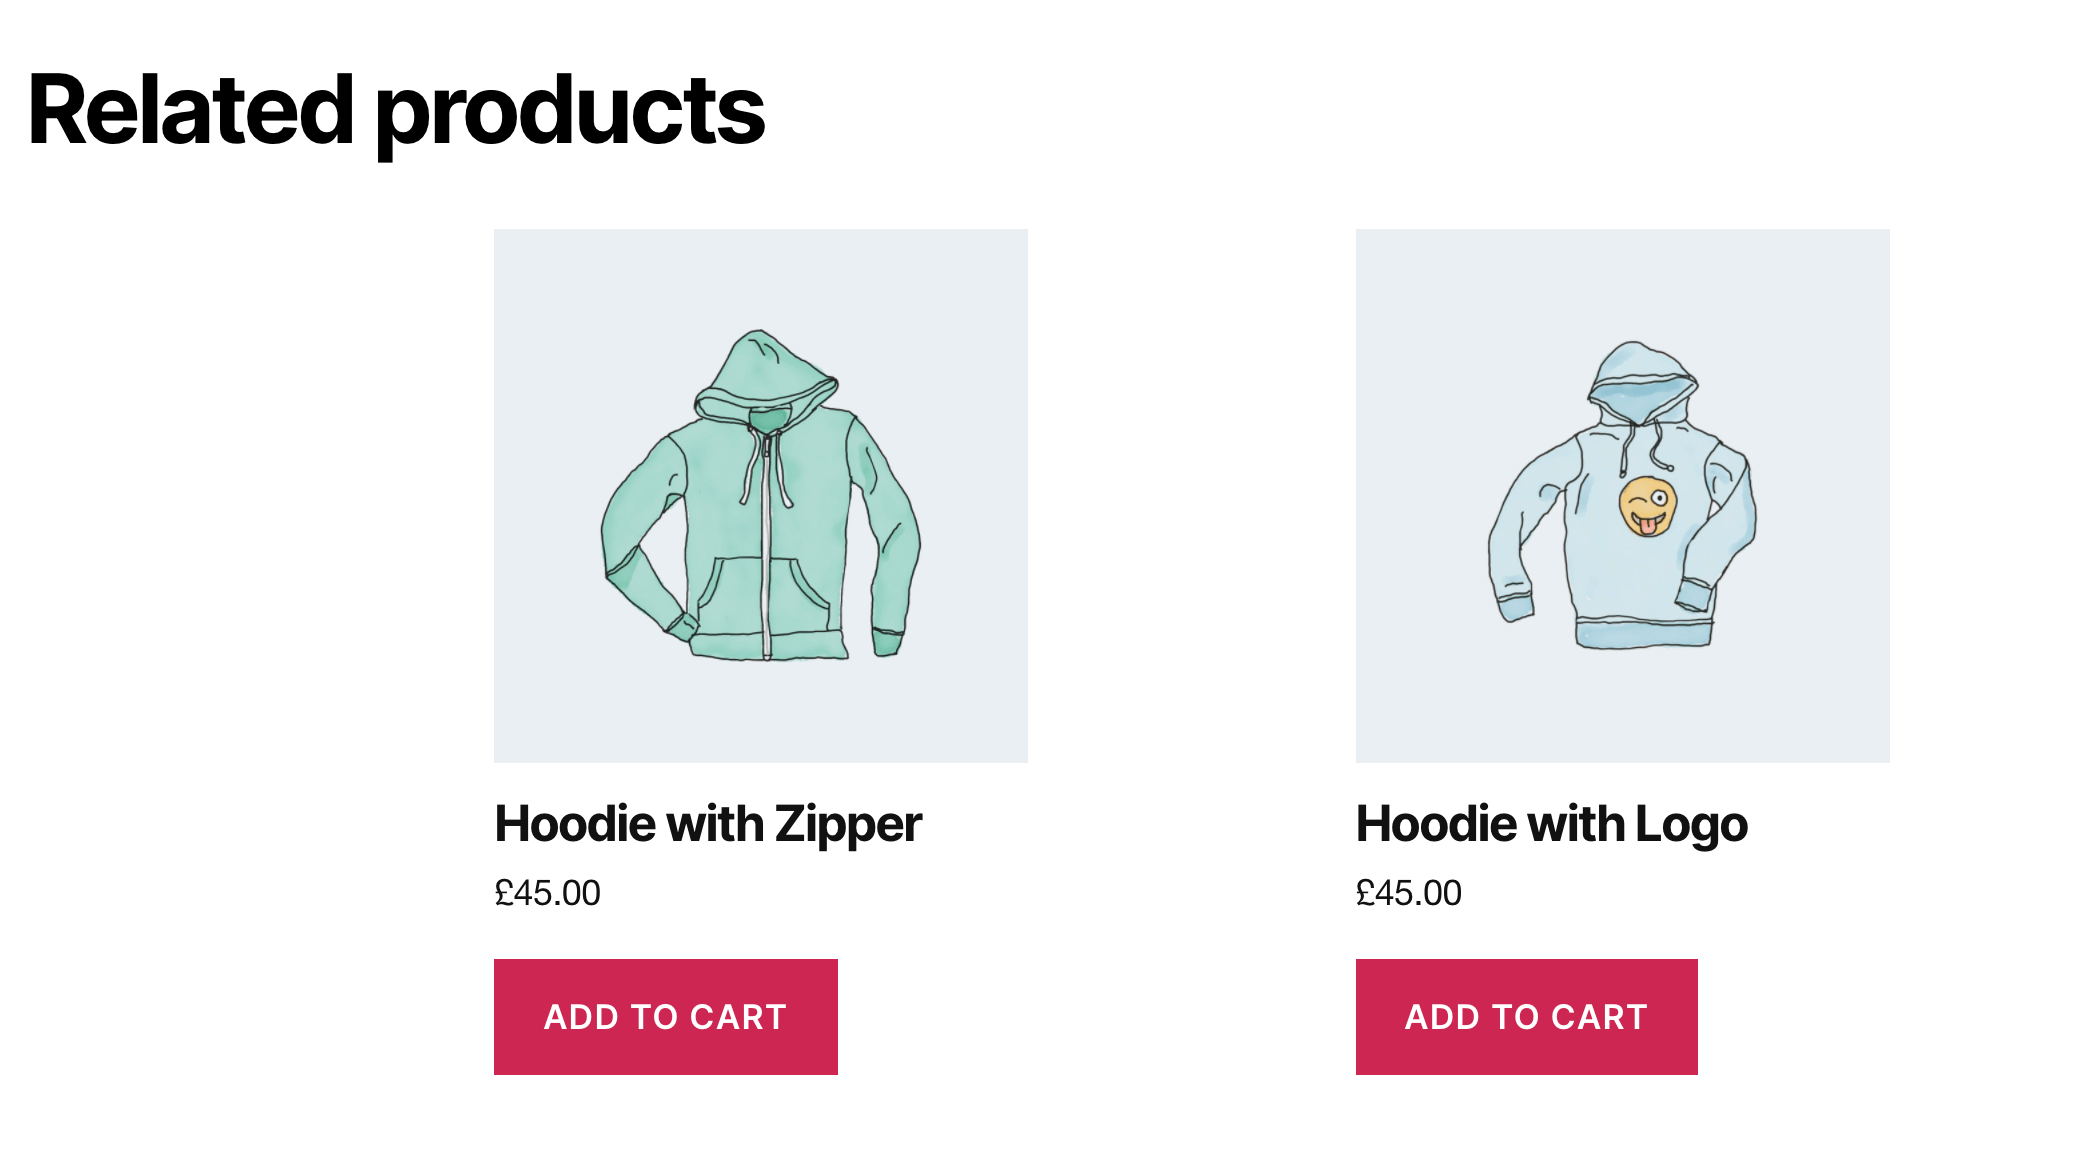 WooCommerce's built-in related products feature.